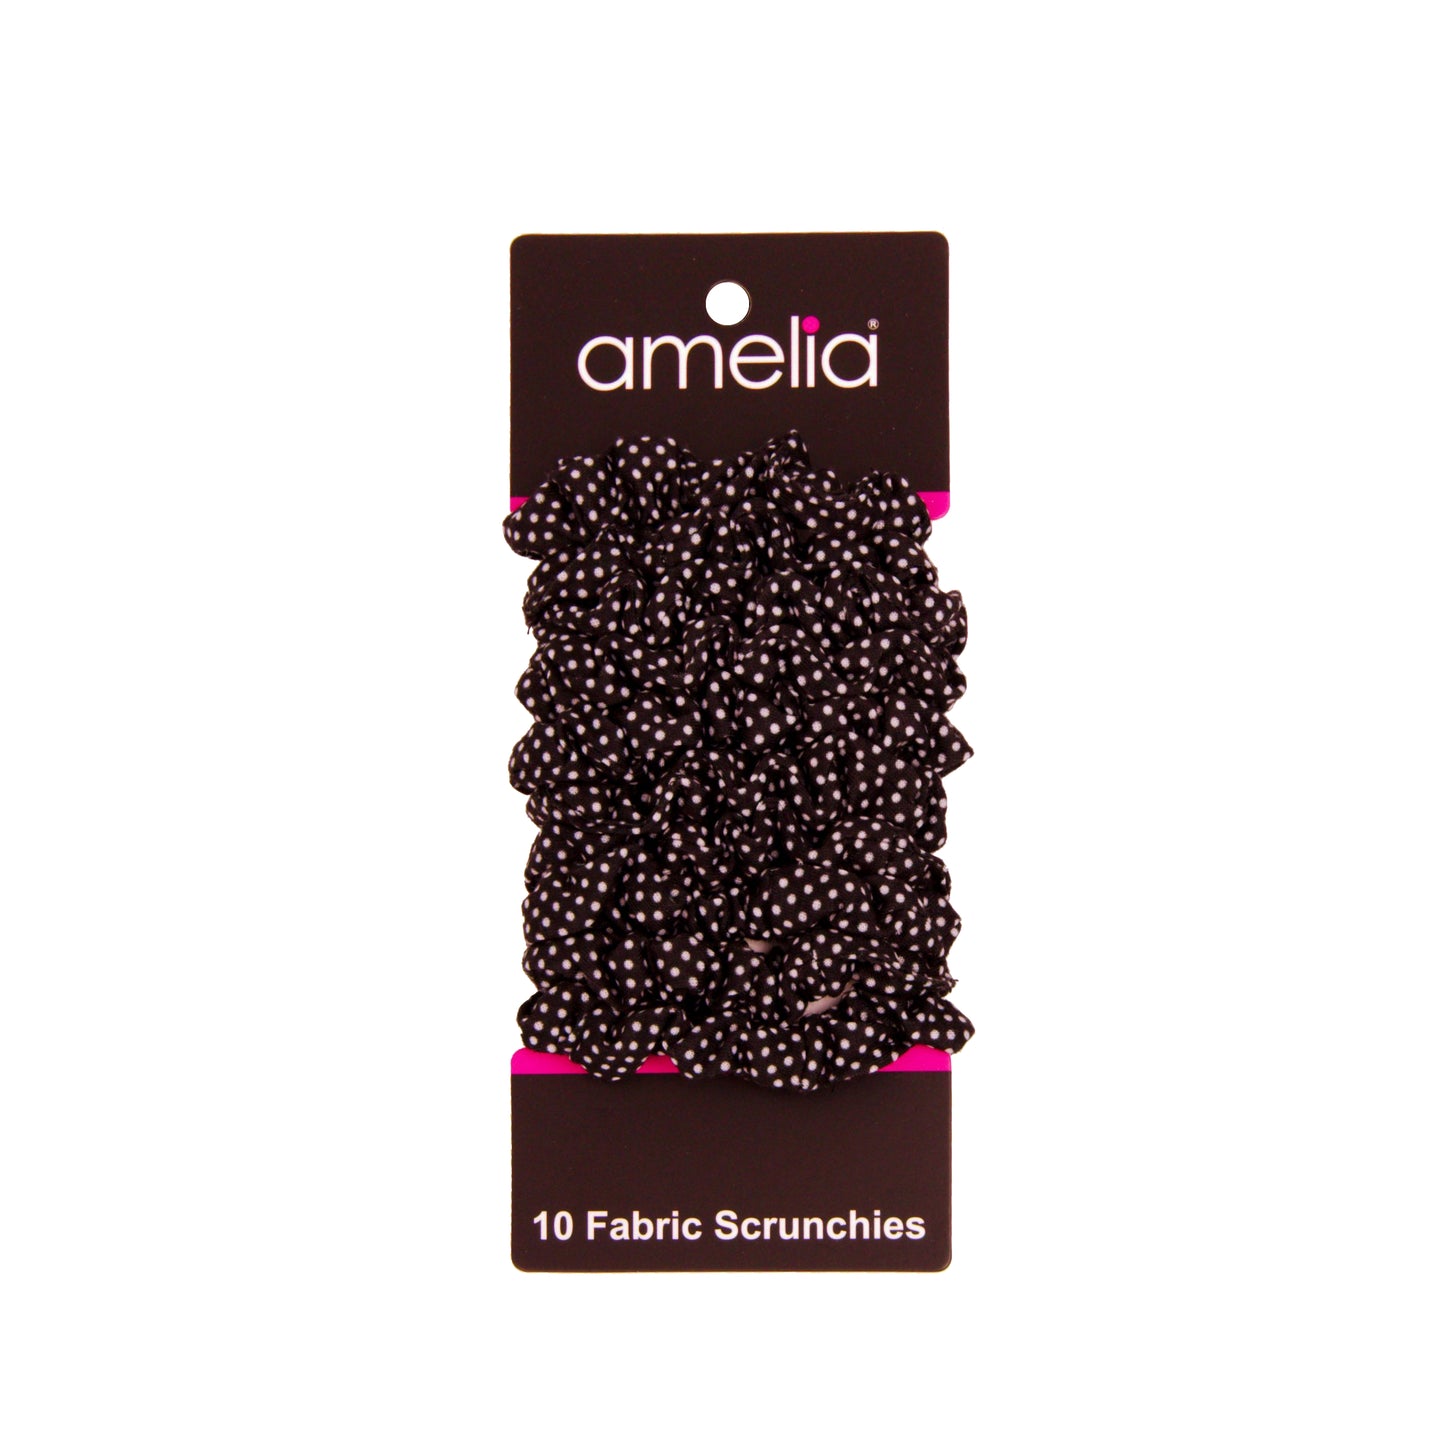 Amelia Beauty, Medium Black White Dot Jersey Scrunchies, 2.5in Diameter, Gentle on Hair, Strong Hold, No Snag, No Dents or Creases. 10 Pack